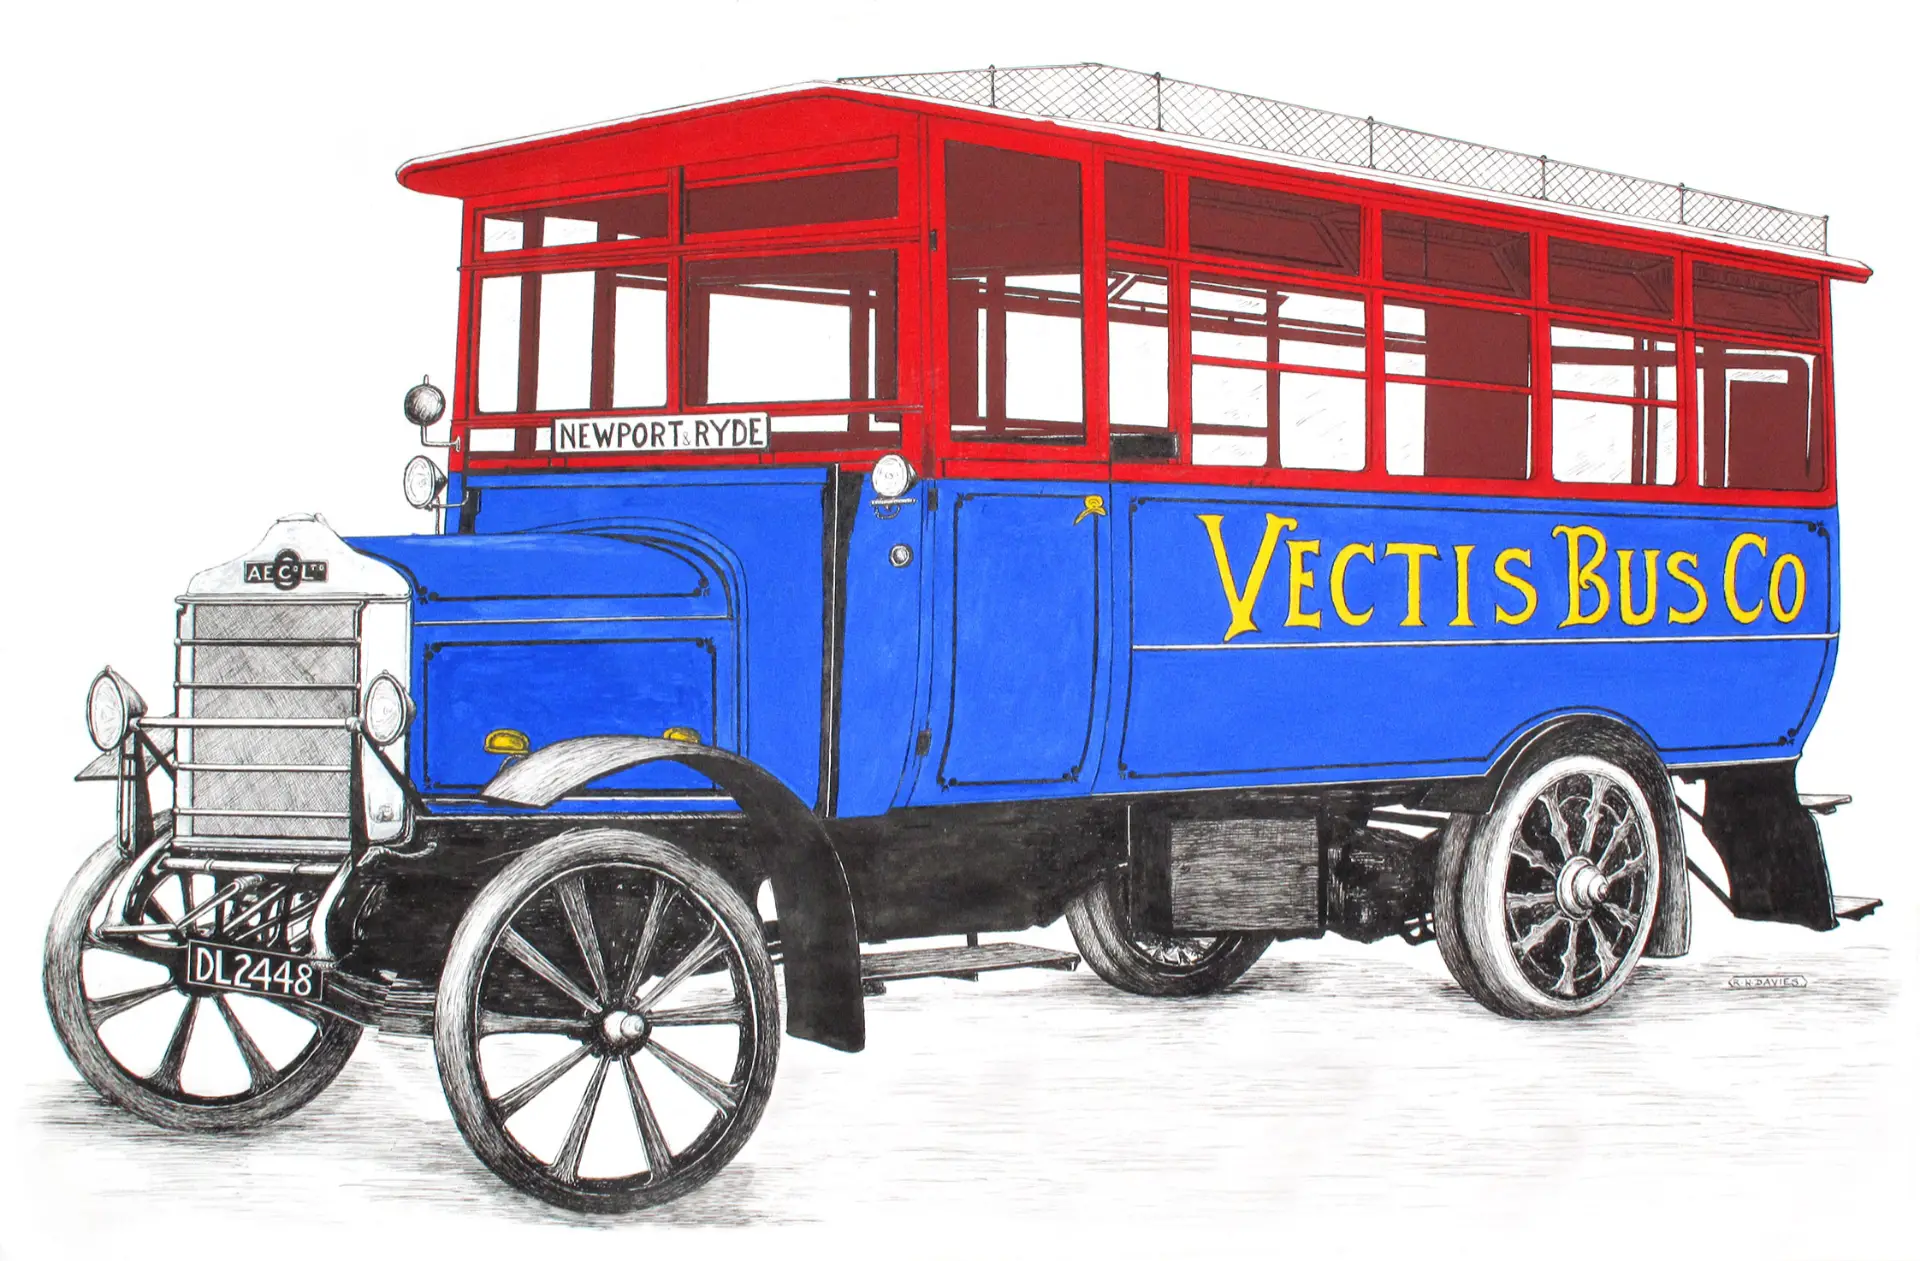 drawing by the late Reg Davies, featuring one of the original three buses.